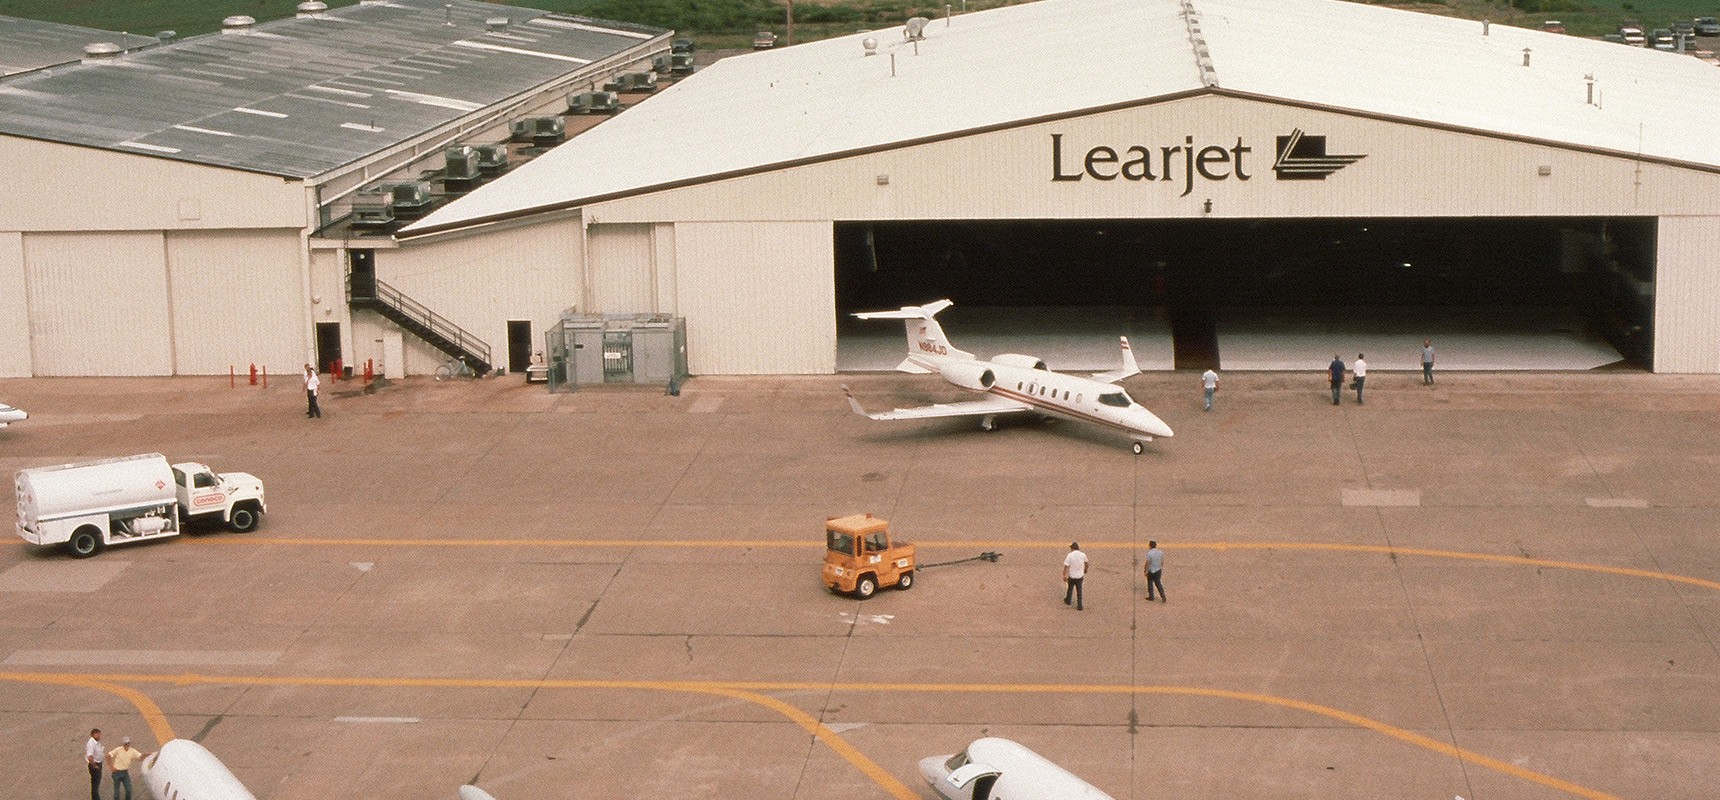 1962 - Learjet : The first business jet